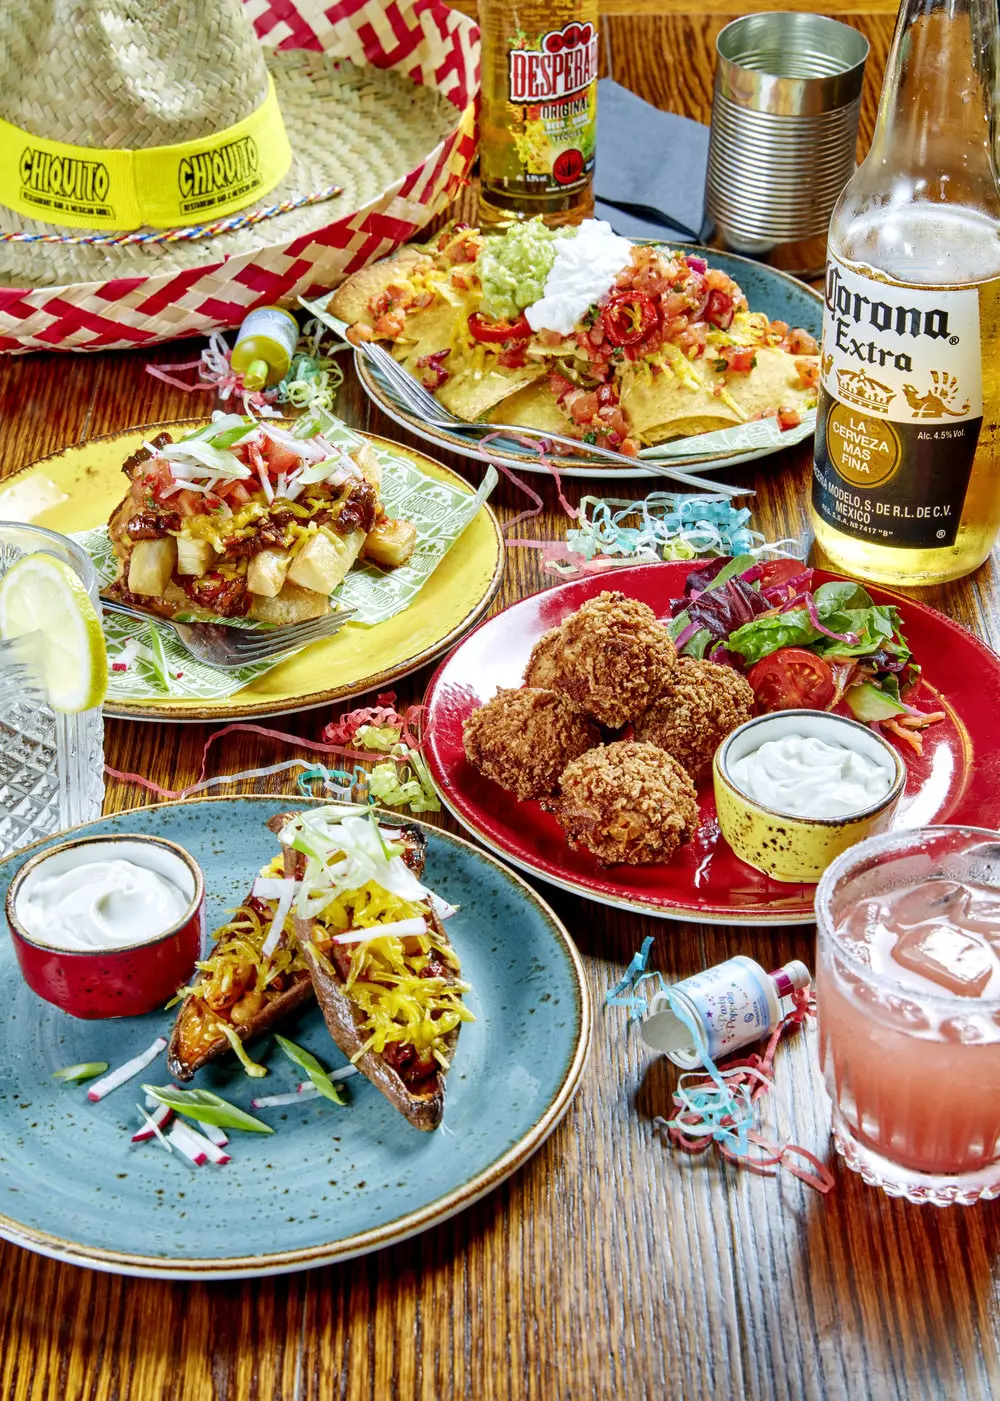 Chiquito takes vegan to the mex level with their biggest ever vegan menu shake up